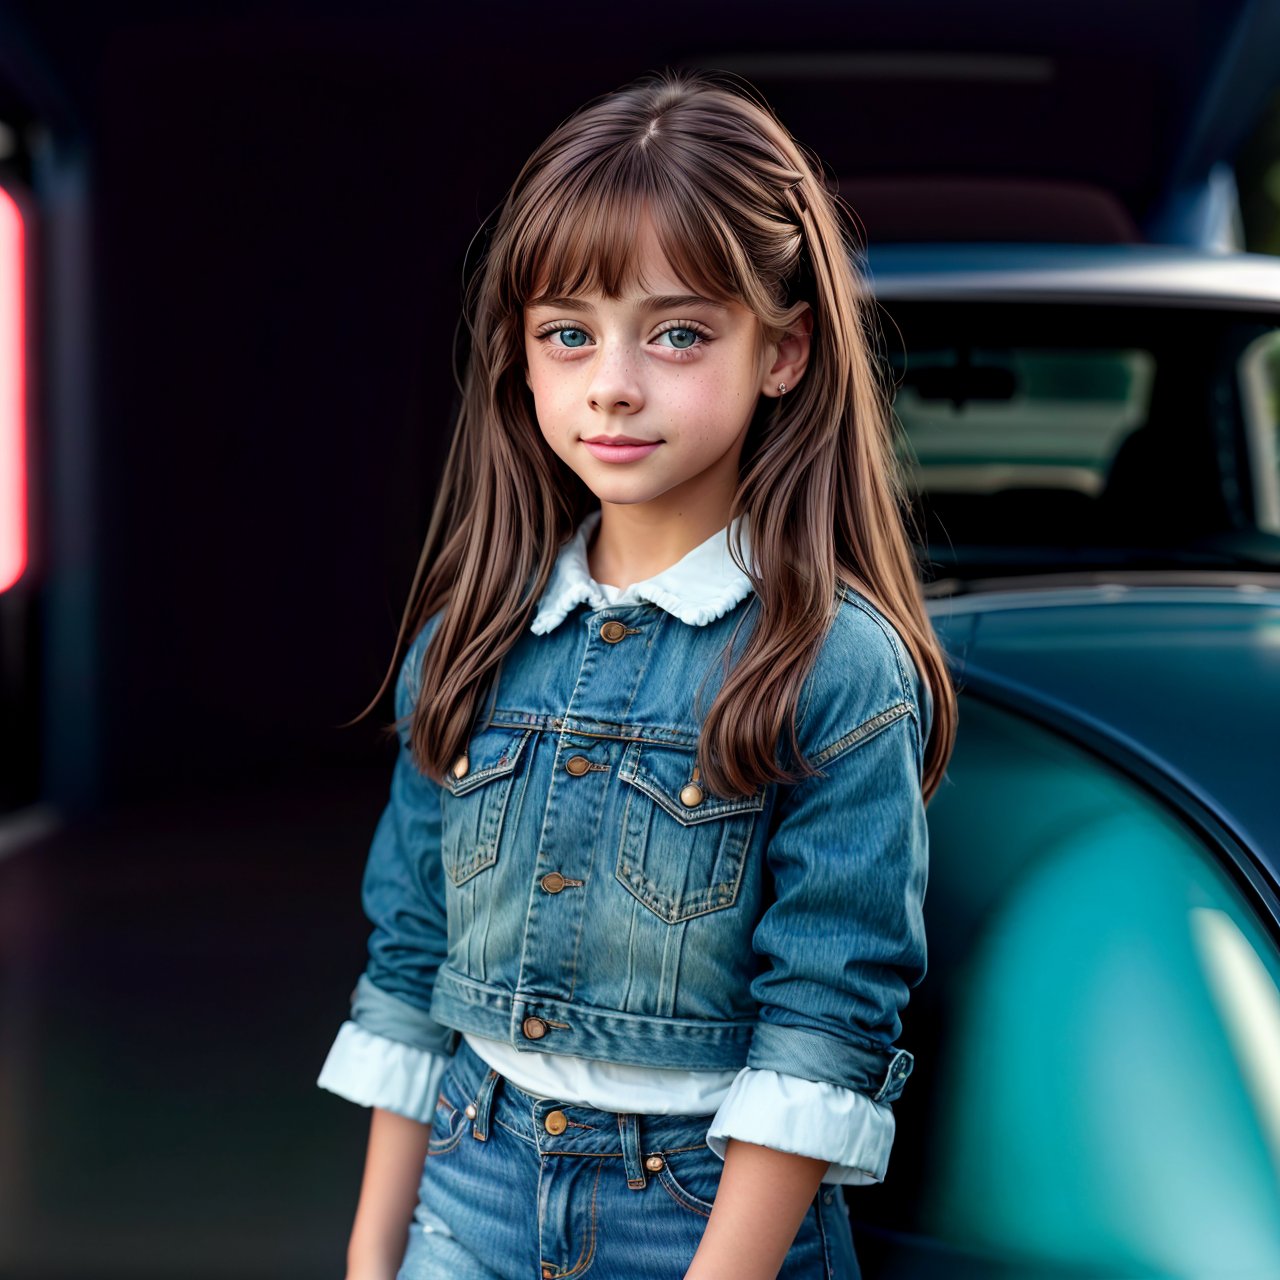 (masterpiece:1.3), HD quality, HD, HQ, 4K, distant short, full body portrait of adorable (AIDA_LoRA_RiWo:1.07) <lora:AIDA_LoRA_RiWo:0.96> as little girl wearing a denim jacket and denim skirt posing in front of the car, on the parking, pretty face, naughty, funny, happy, playful, intimate, dramatic, hyper realistic, studio photo, studio photo, kkw-ph1, hdr, f1.6, (colorful:1.1)